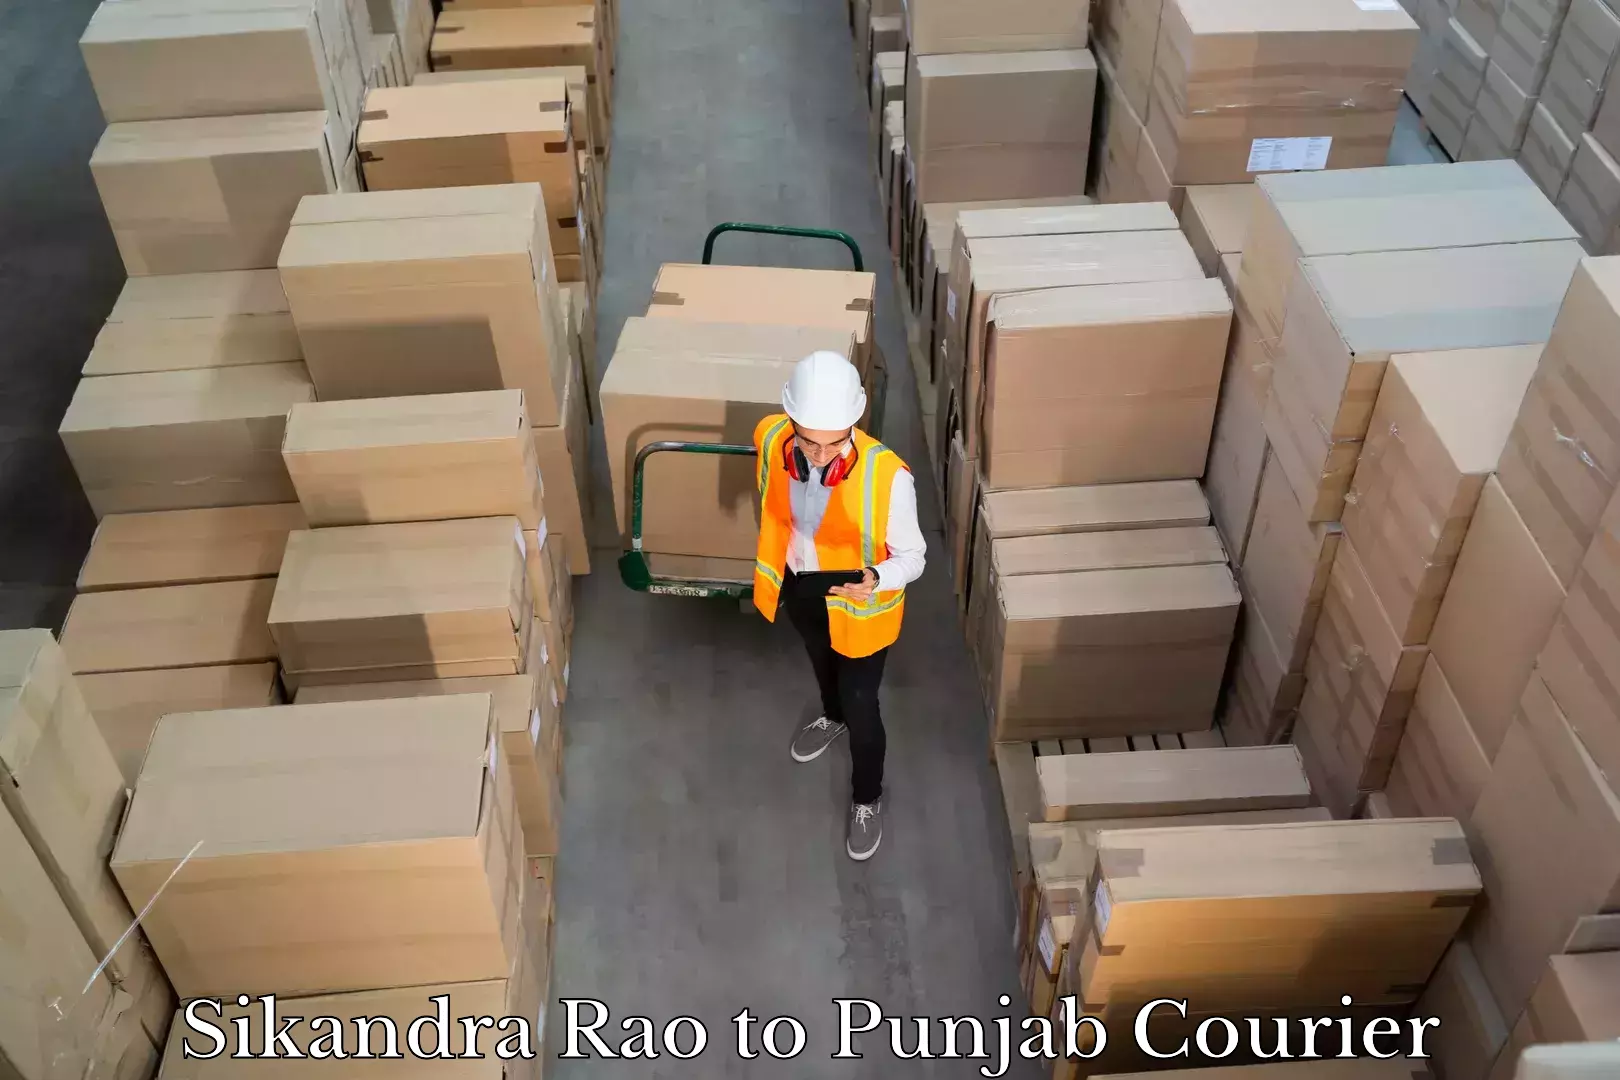 Luggage delivery network Sikandra Rao to Amritsar